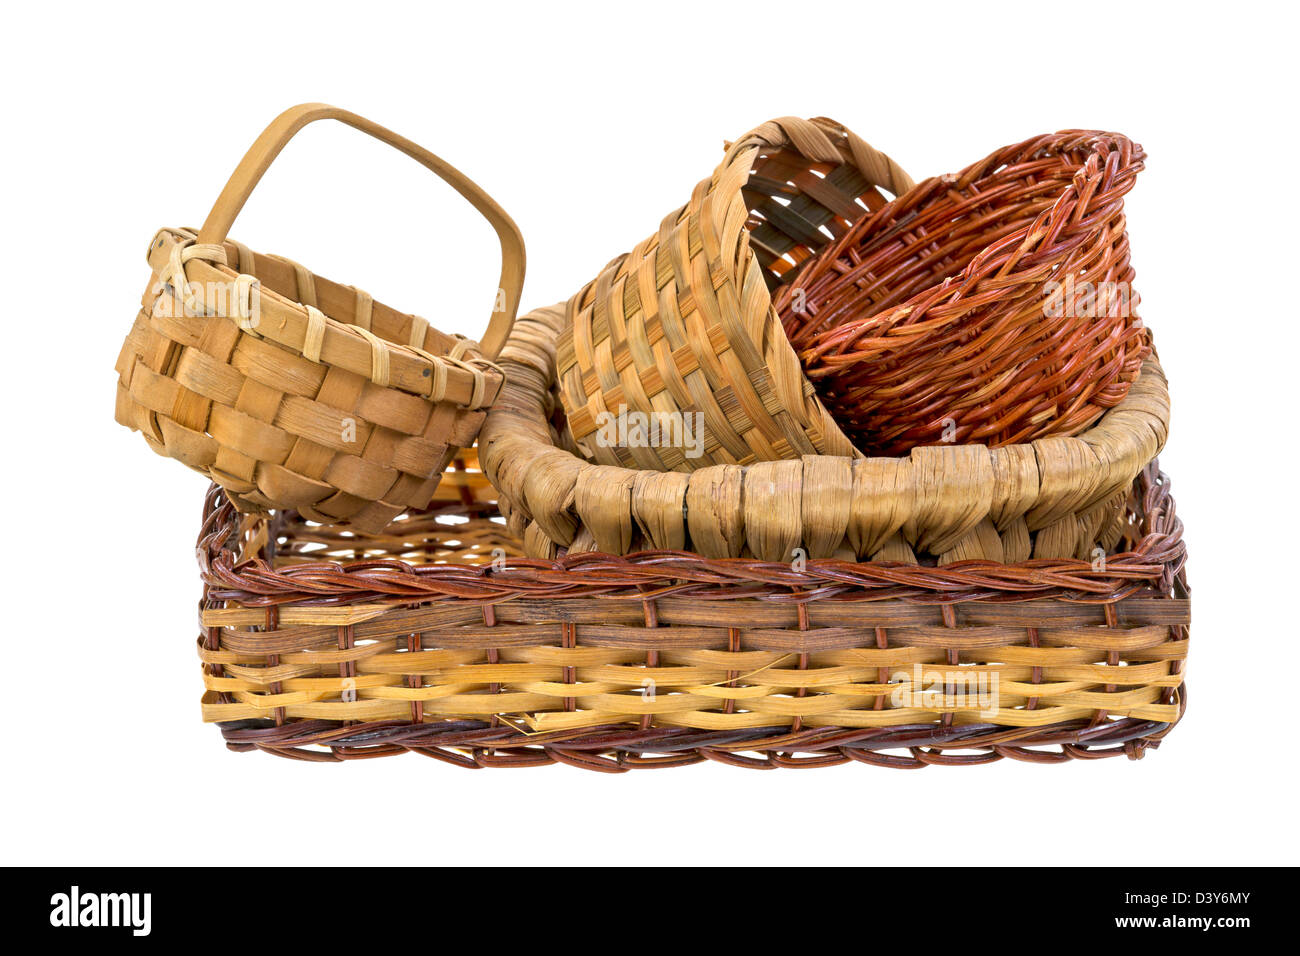 Several wicker baskets stacked inside a larger wicker basket on a white background. Stock Photo